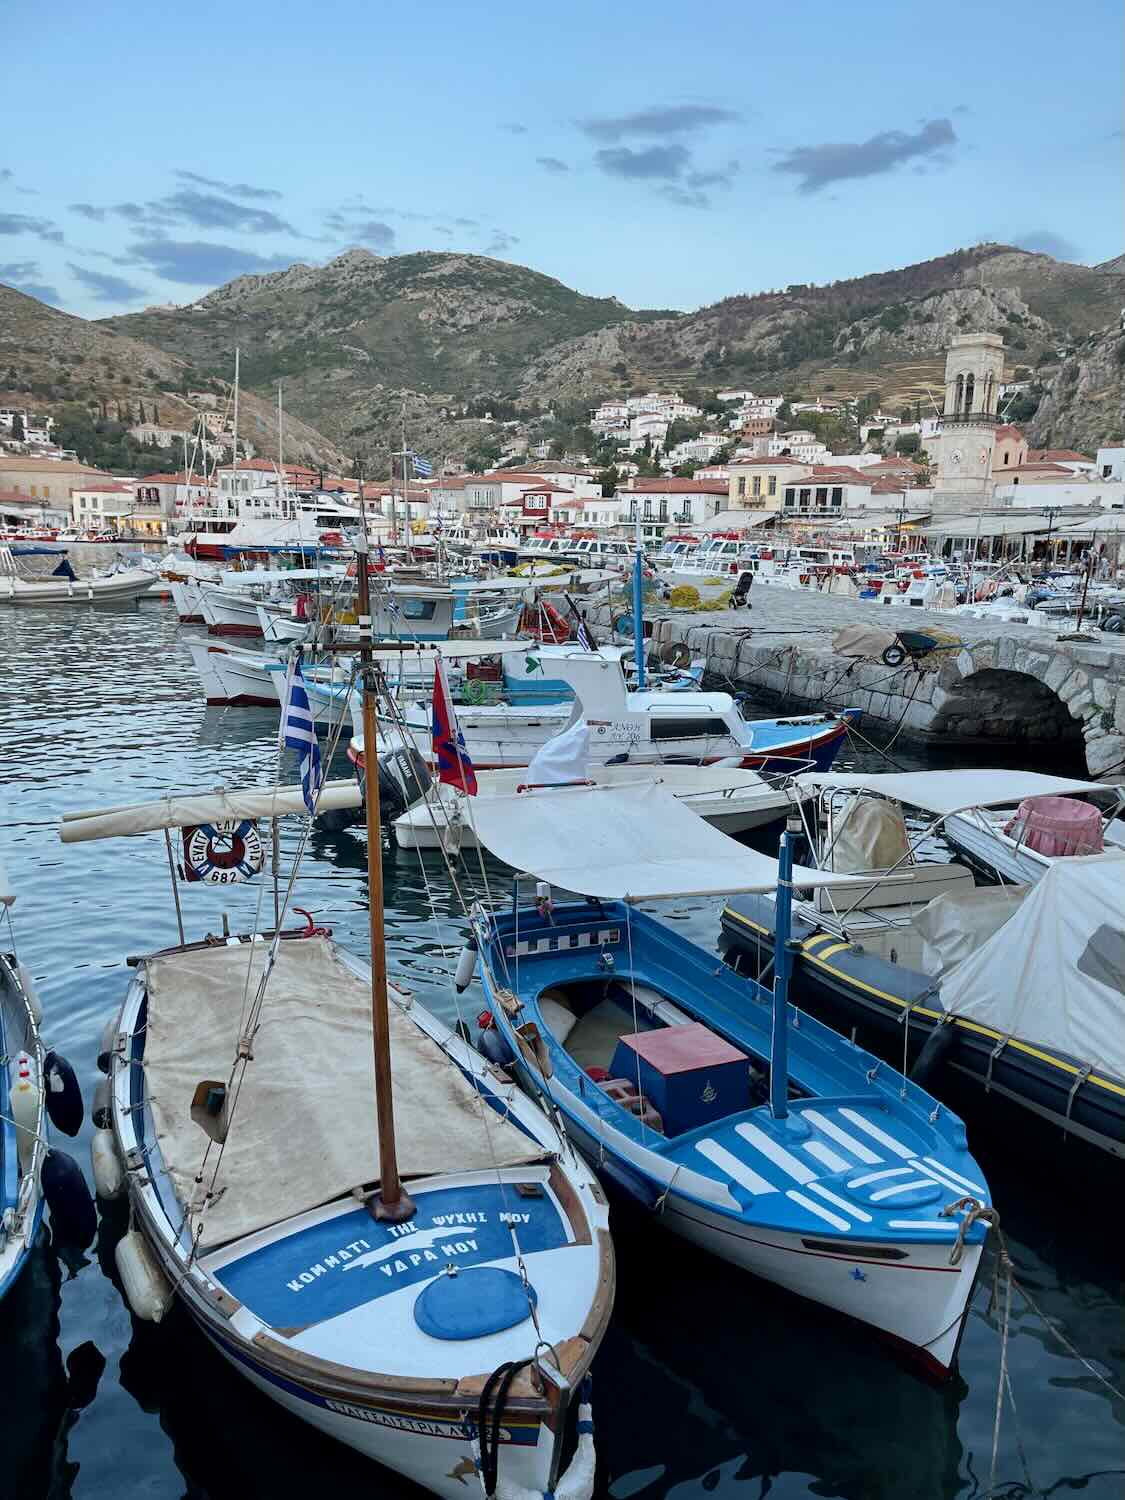 Bustling Hydra port with moored boats displaying vibrant flags and the picturesque town rising in the background, embodying the island's maritime charm.